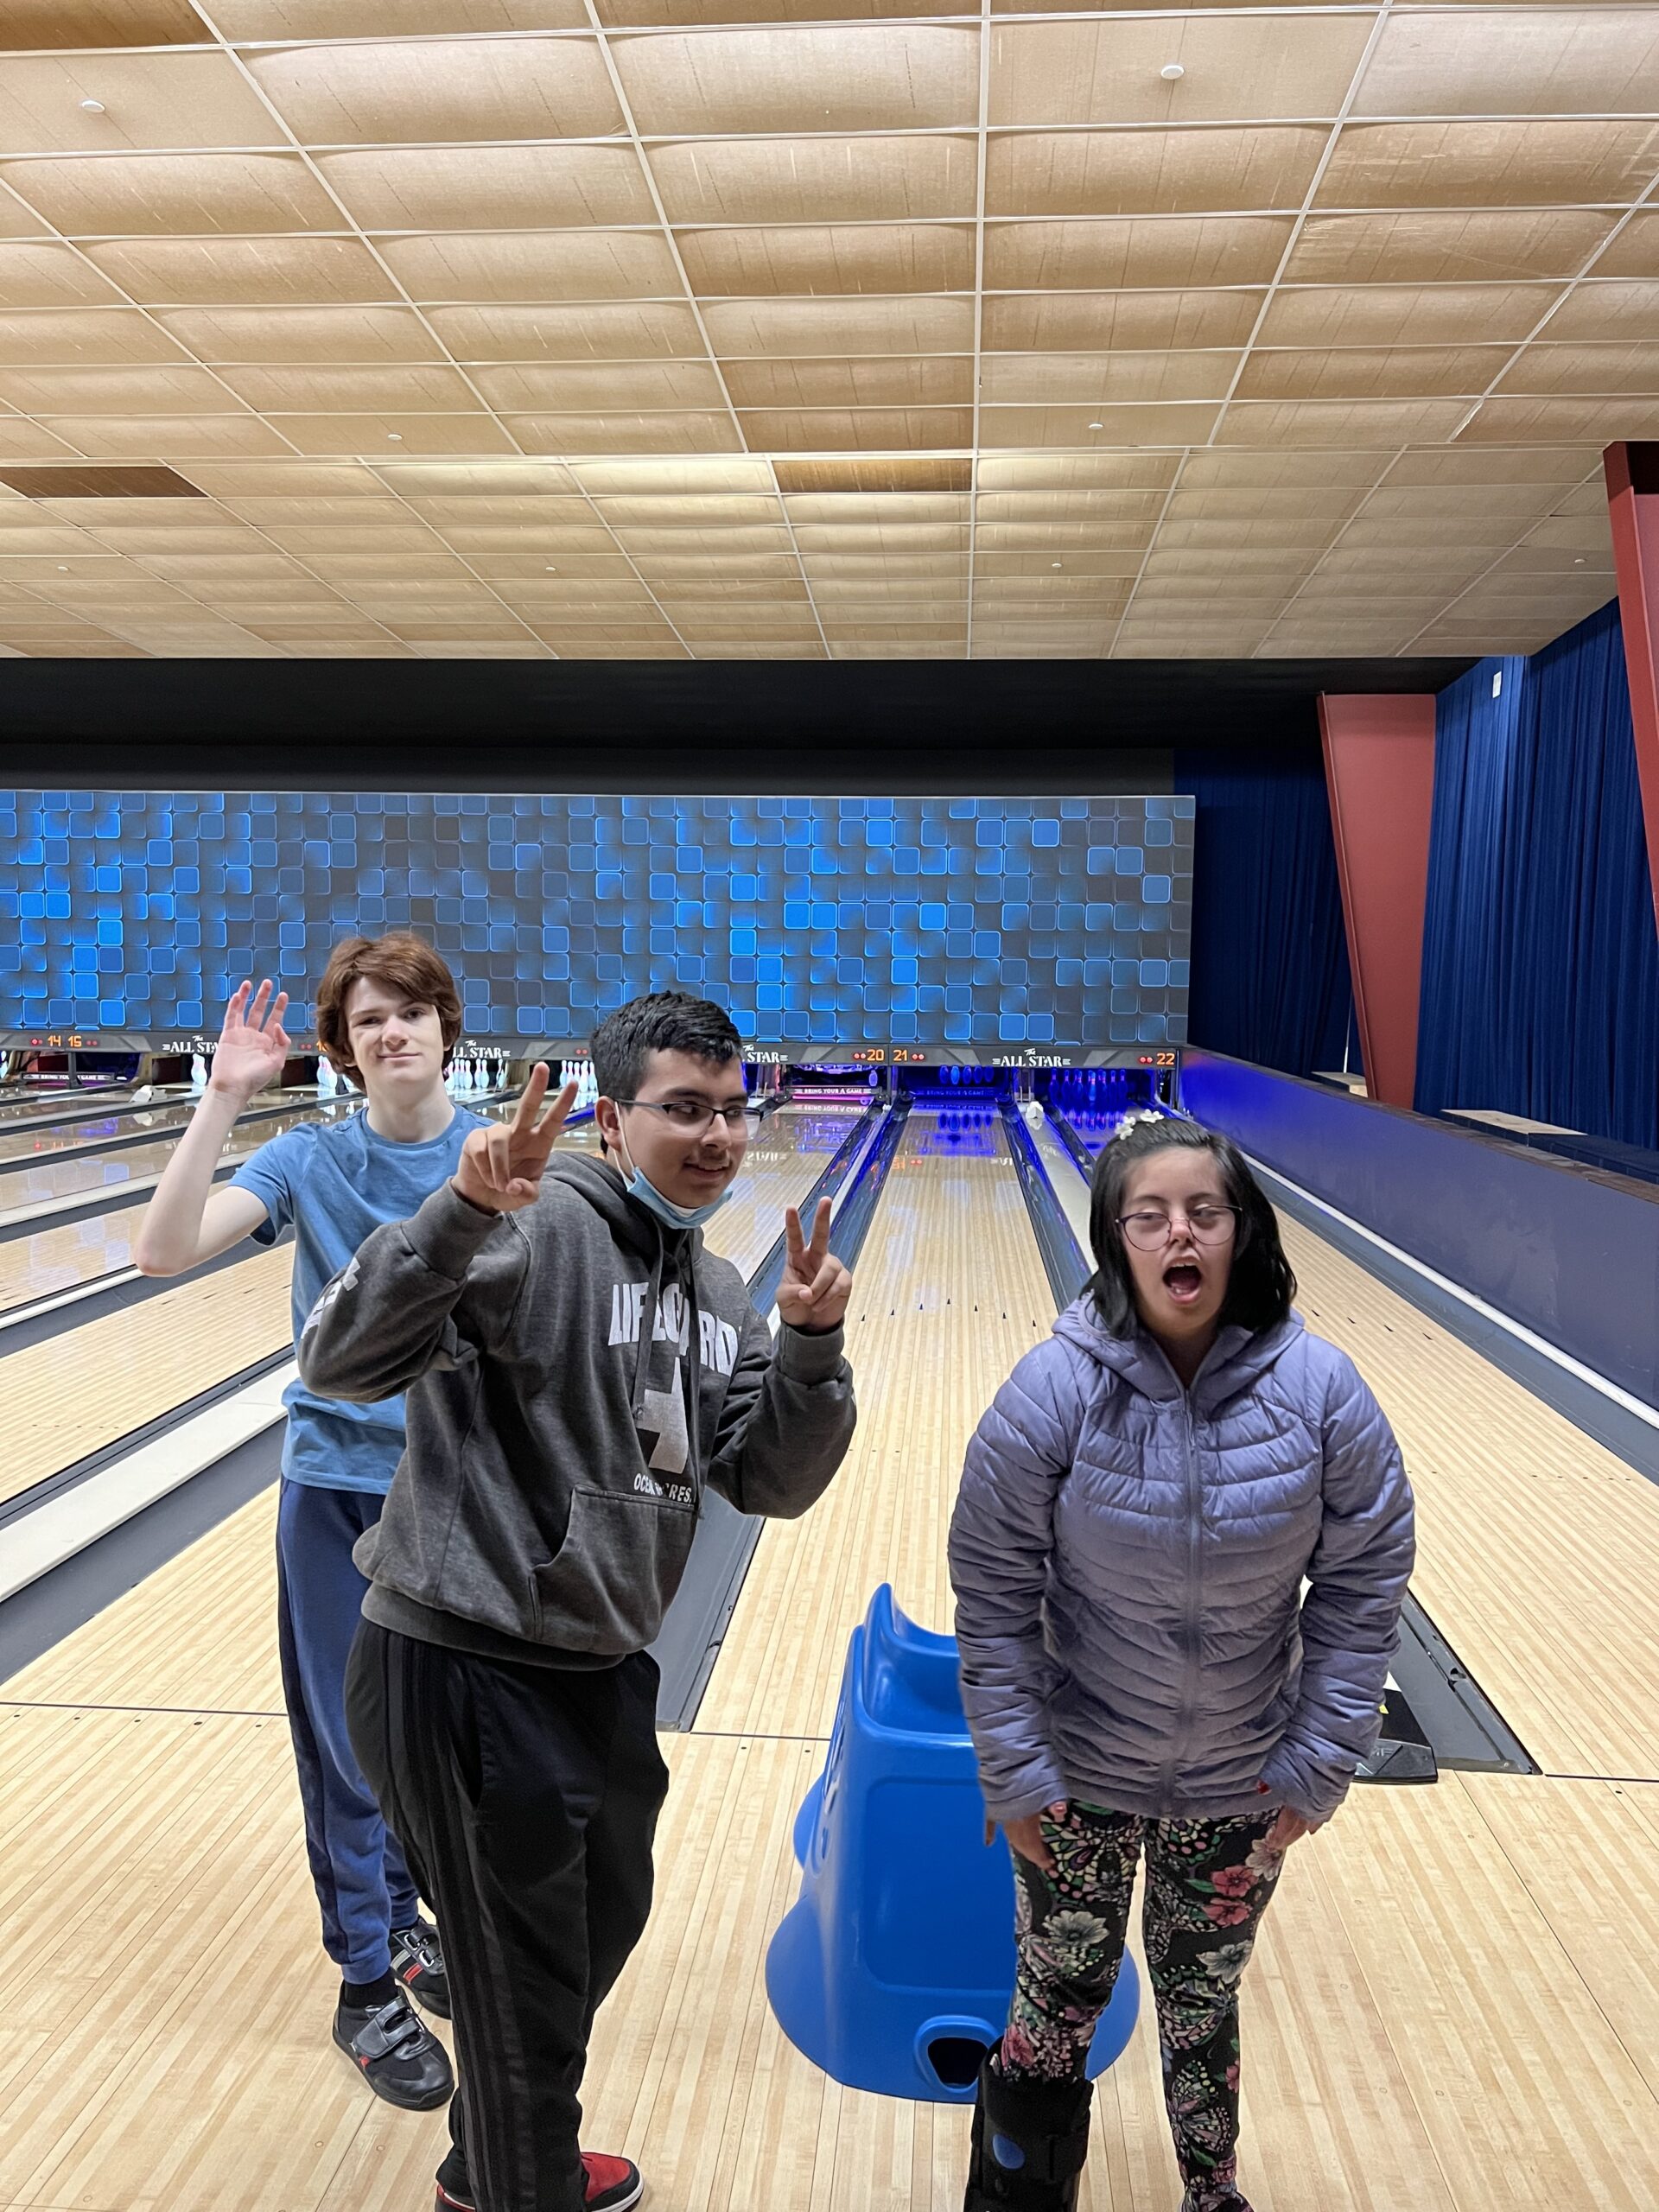 Southampton unified bowling team members, from left, Thomas Lubbe, David Balderas and Juliana Figueroa got some practice in this past Saturday at All Star Bowl in Riverhead.